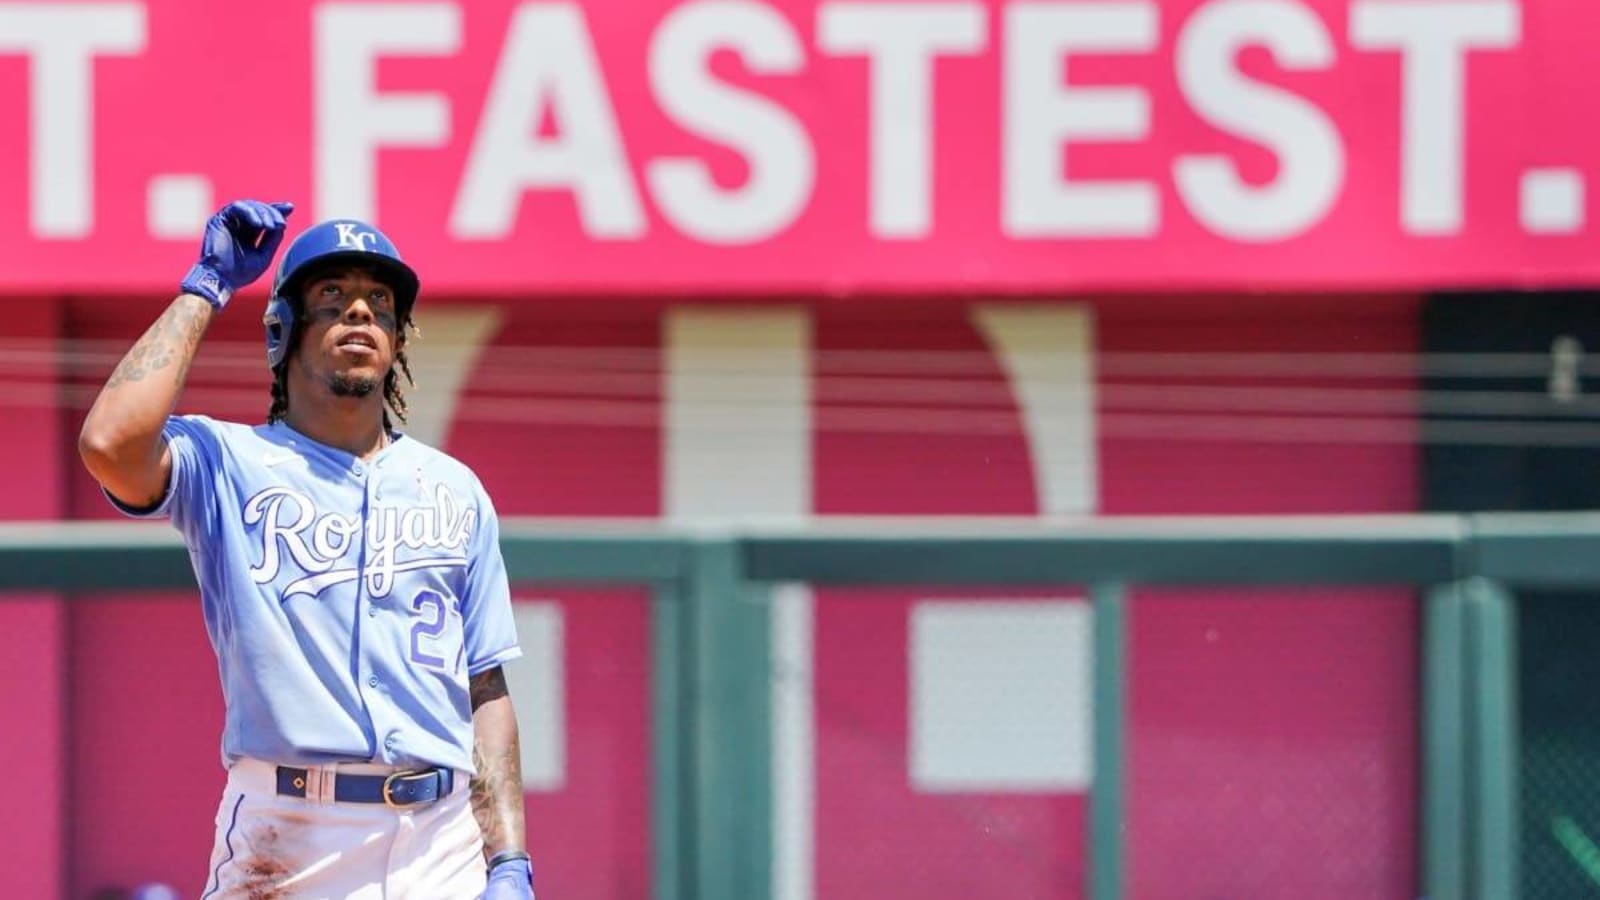 Putting Together an Adalberto Mondesi Trade Package With Red Sox